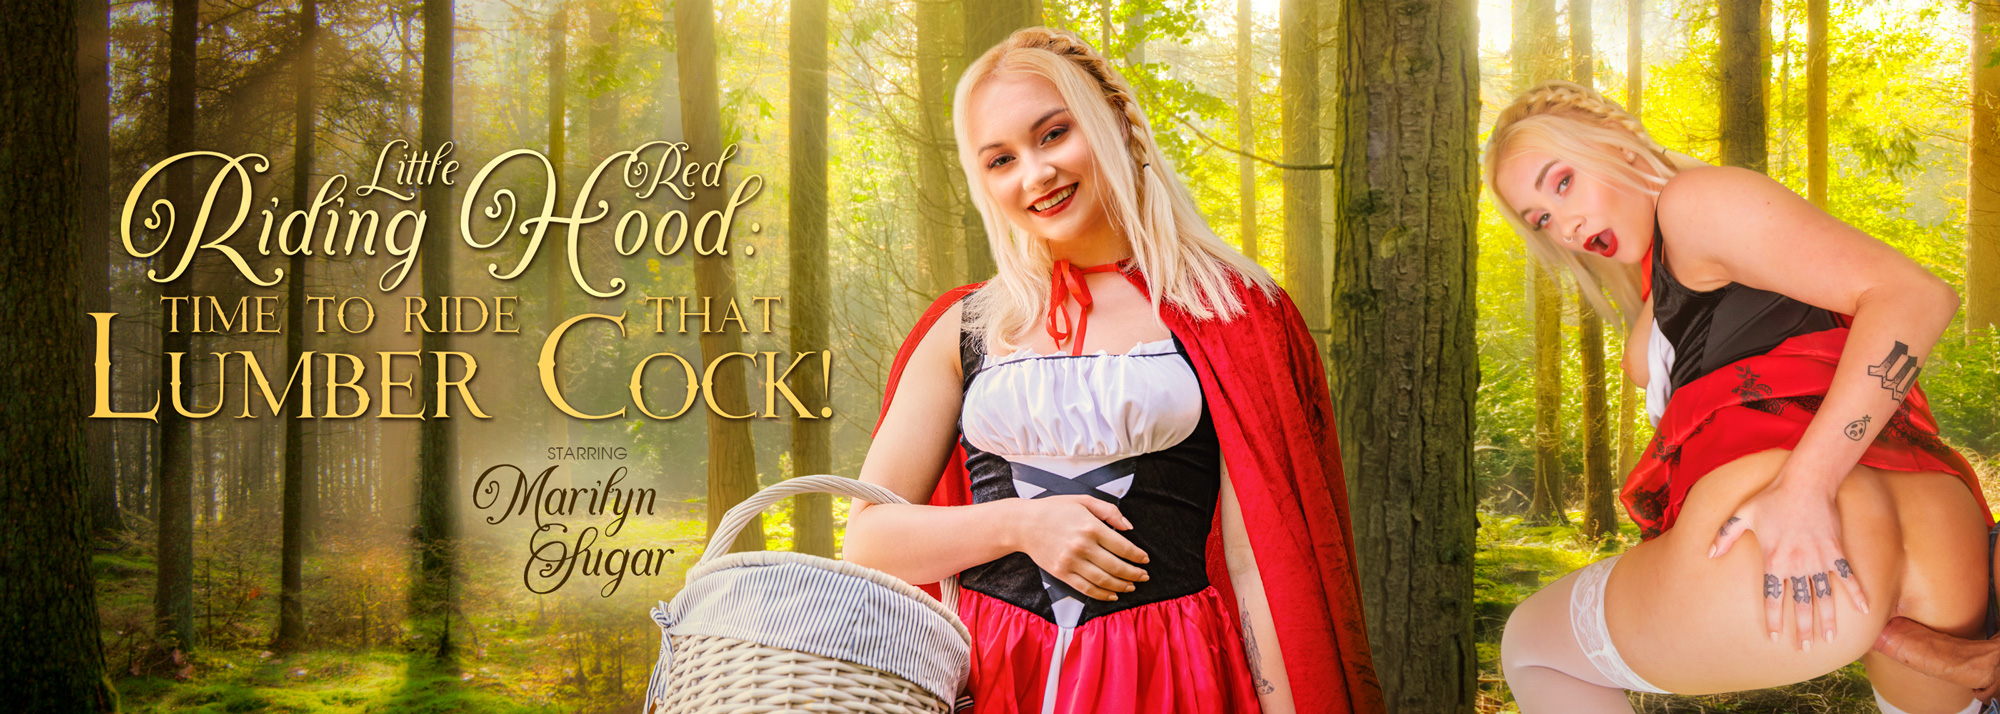 Little Red Riding Hood: Time to Ride That Lumber Cock! with Marilyn Sugar  Slideshow